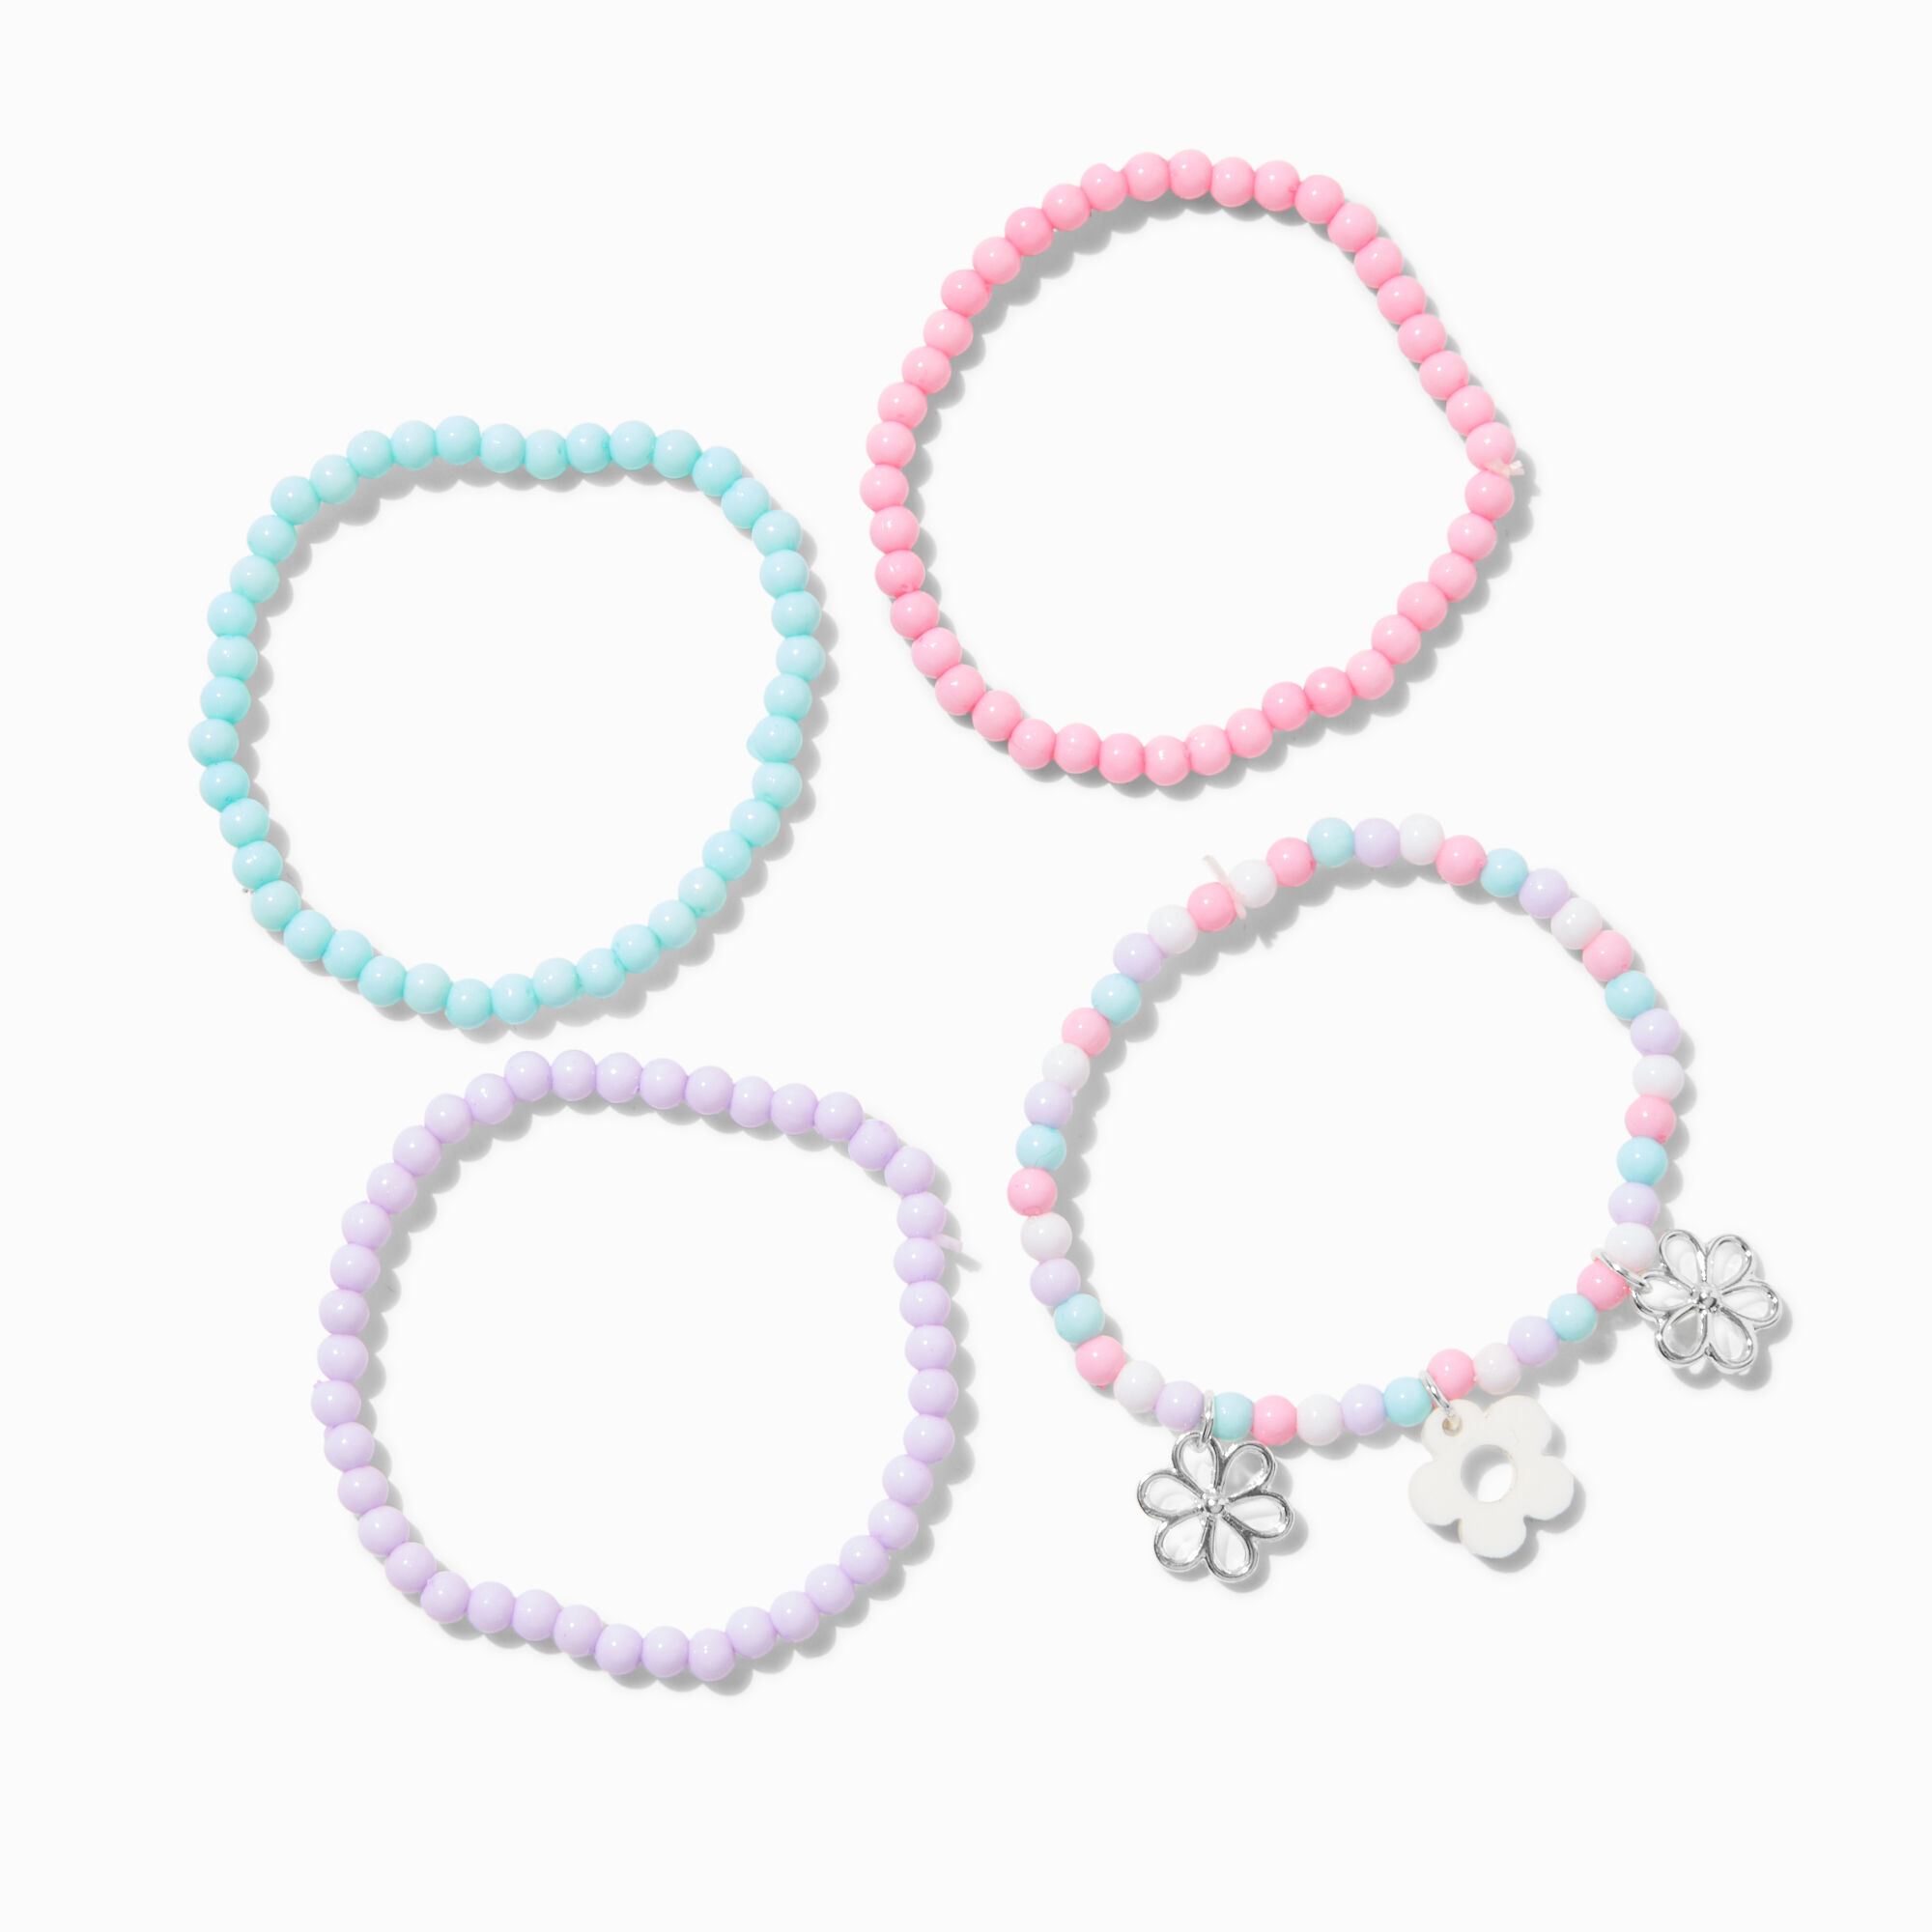 View Claires Club Pastel Seed Bead Stretch Bracelets 4 Pack information